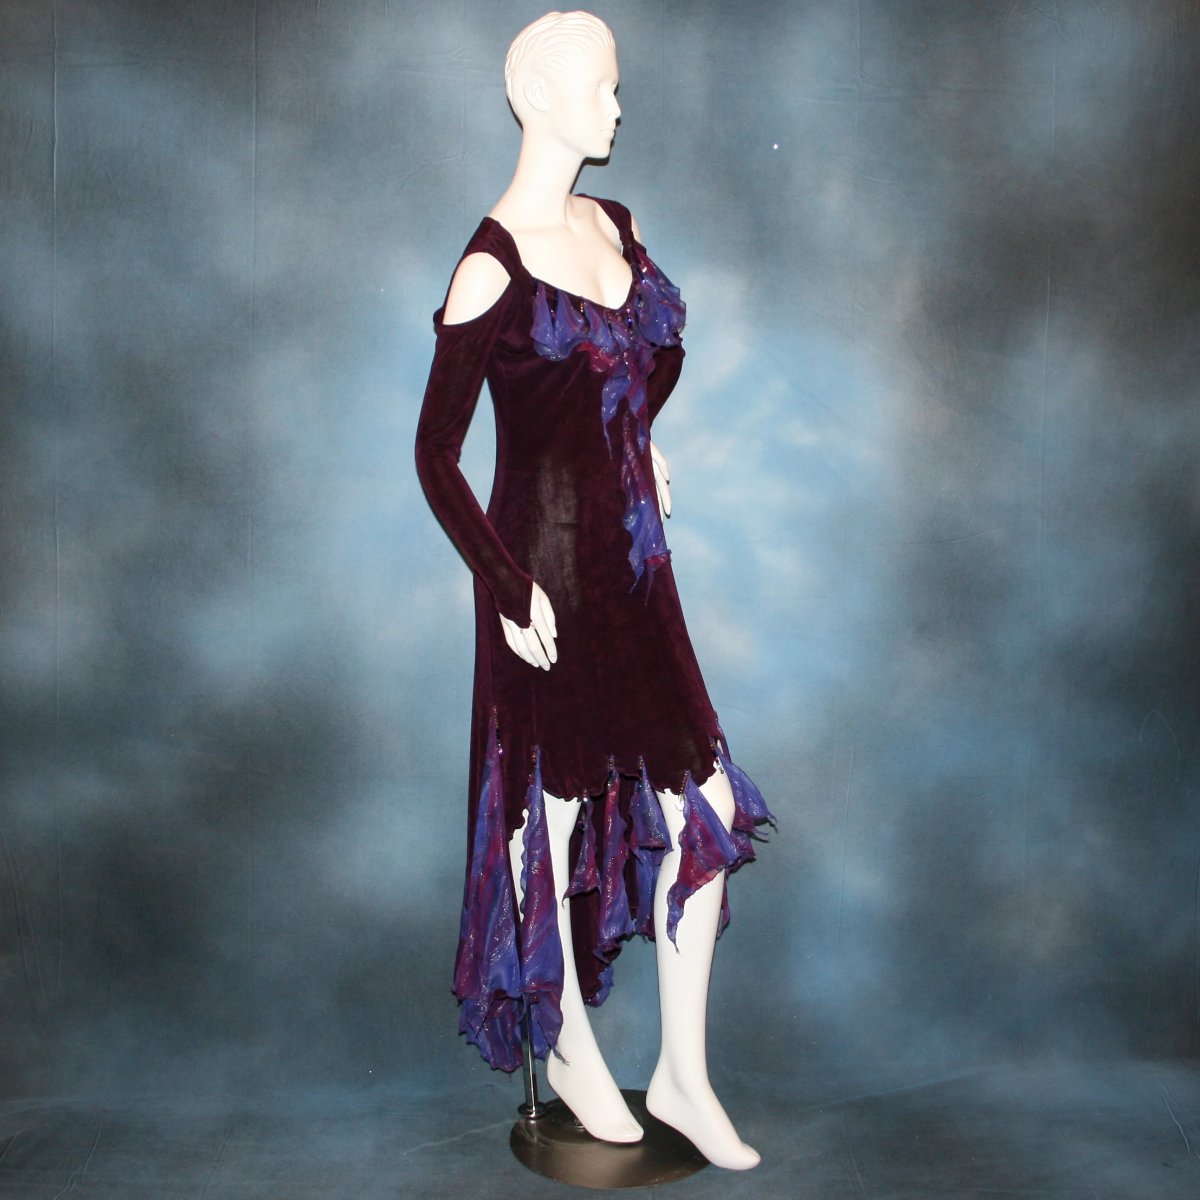 side view of Social ballroom dance dress created in luxurious wine solid slinky fabric with flounces of deep scarlette & wine printed & dazzling chiffon, with Swarovski hand beading. A great social dress for any ballroom dance or special occasion, as well as a great beginner ballroom dance show dress!  